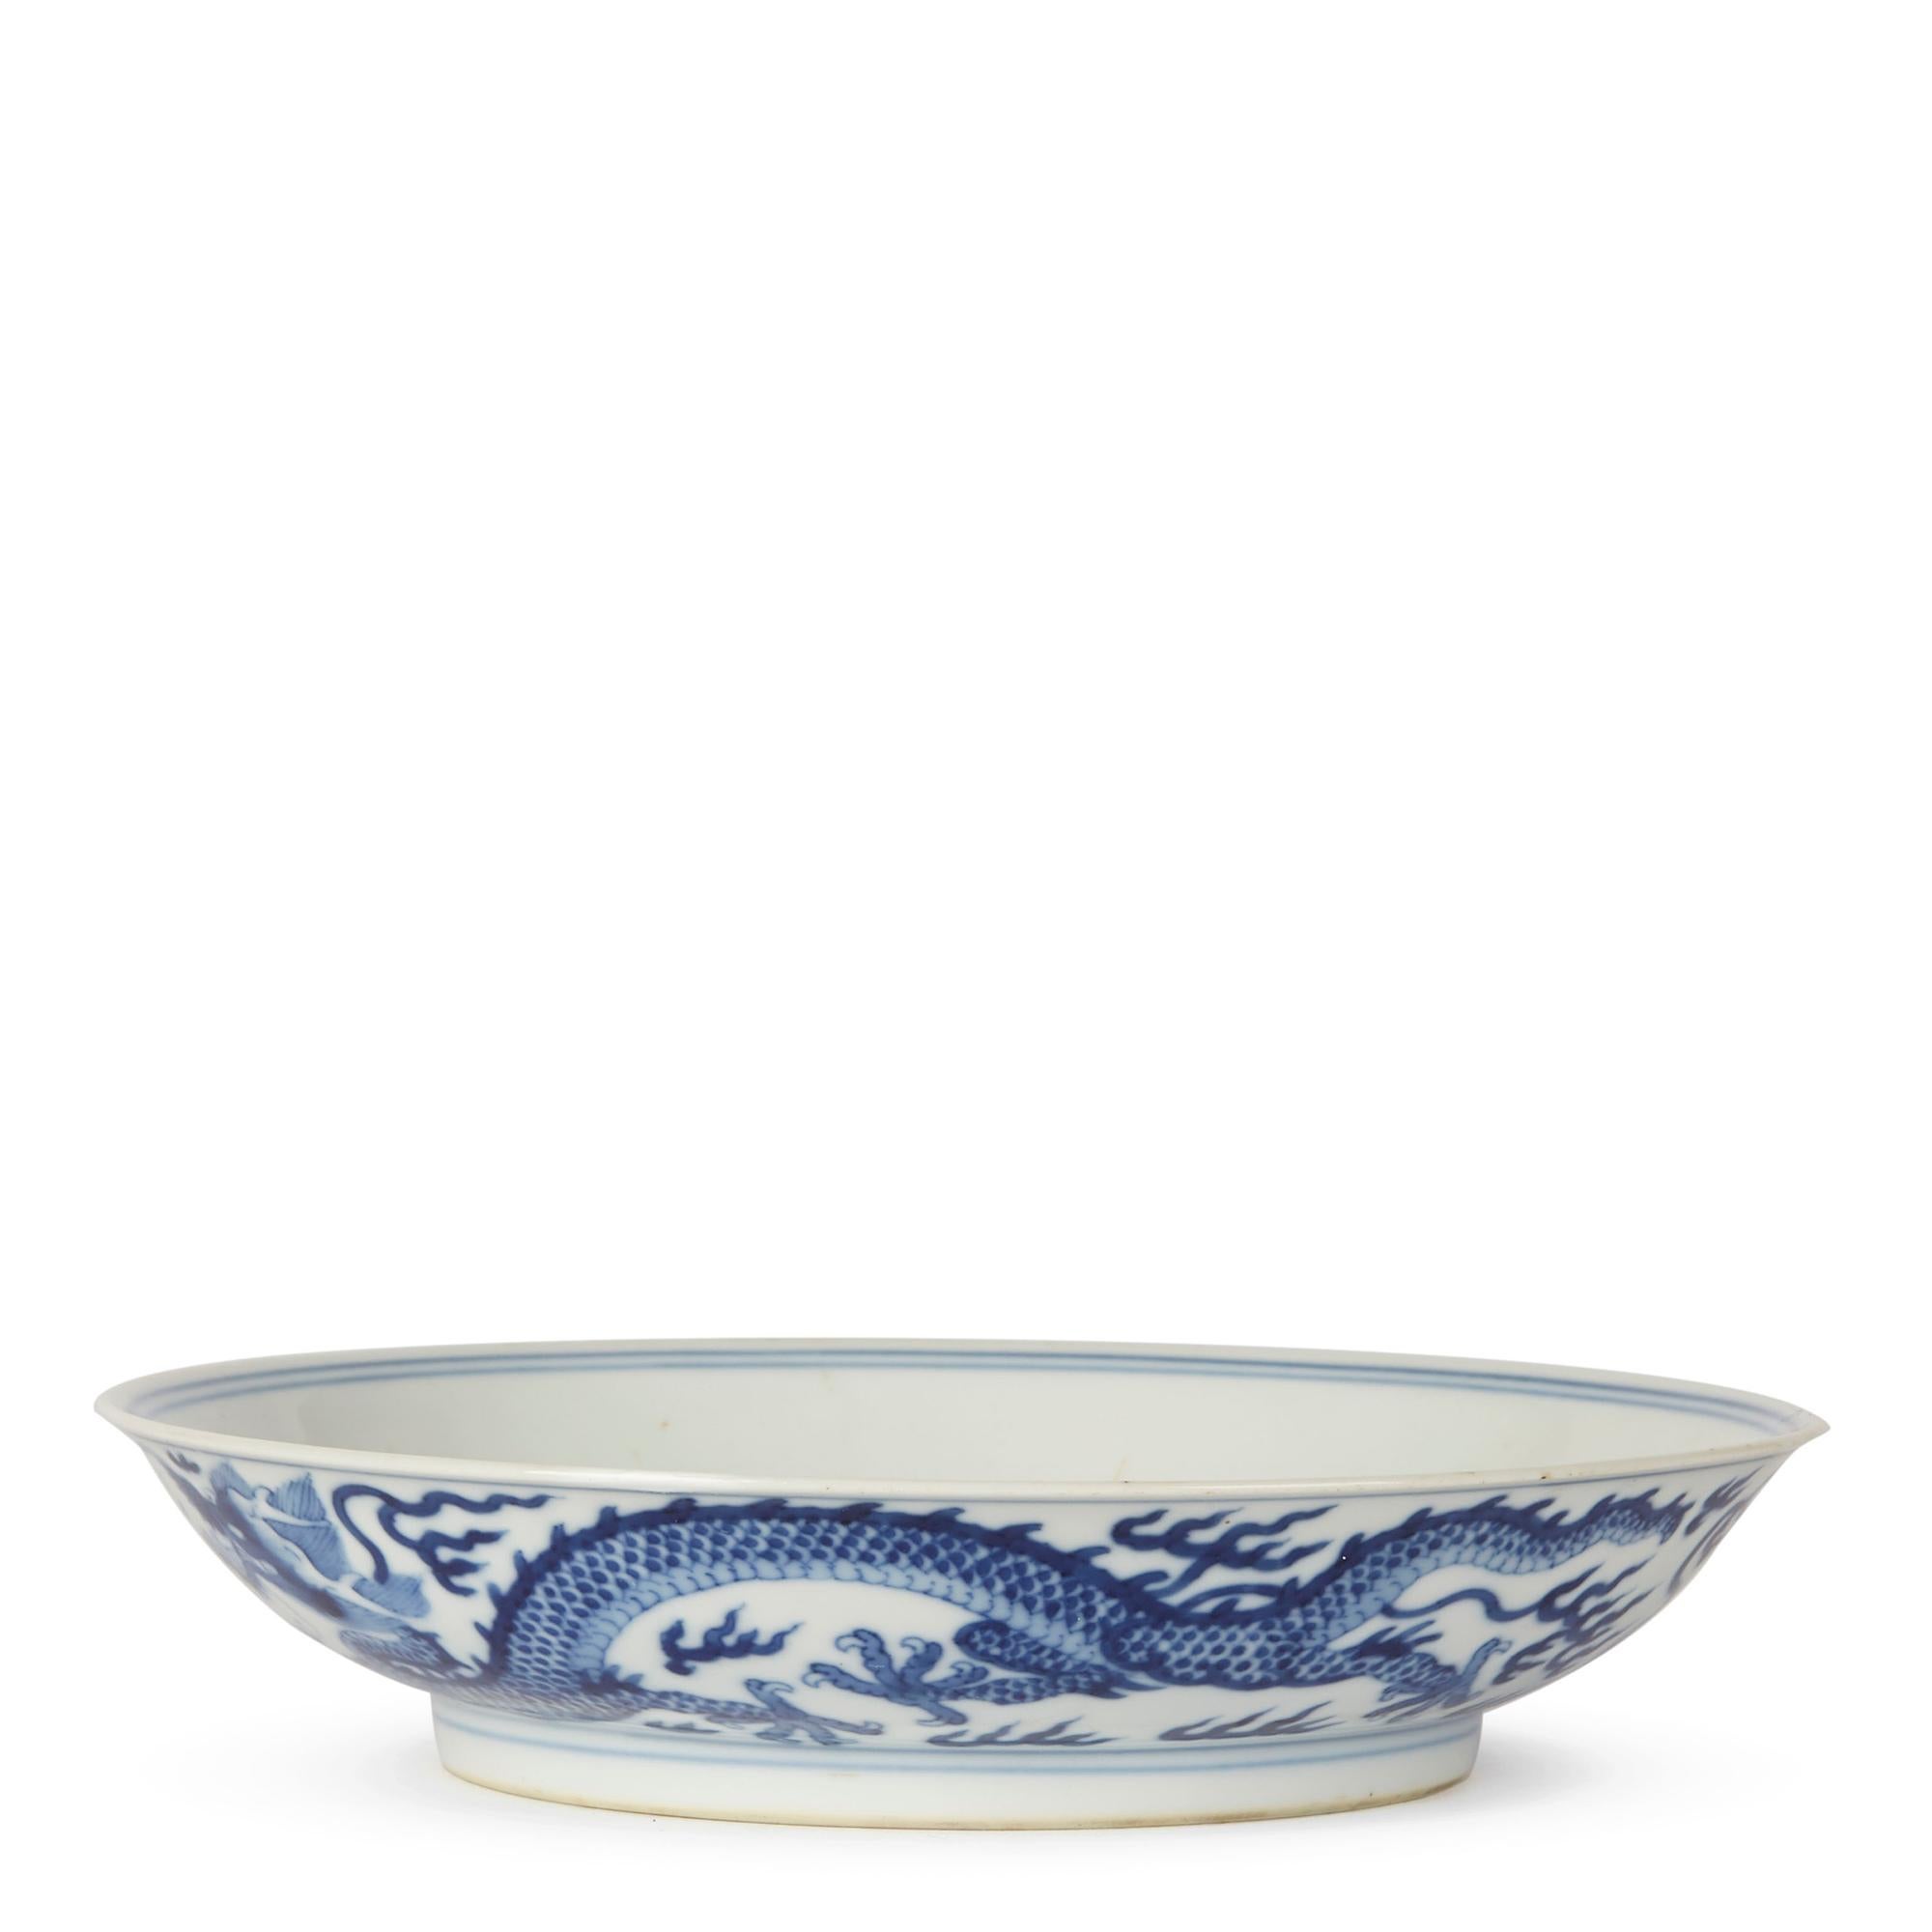 A stunning and rare Chinese Qianlong porcelain blue and white shallow dish finely decorated with a central five claw imperial dragon chasing a flaming pearl through clouds. The pattern is repeated around the outside rim of the dish with simple line